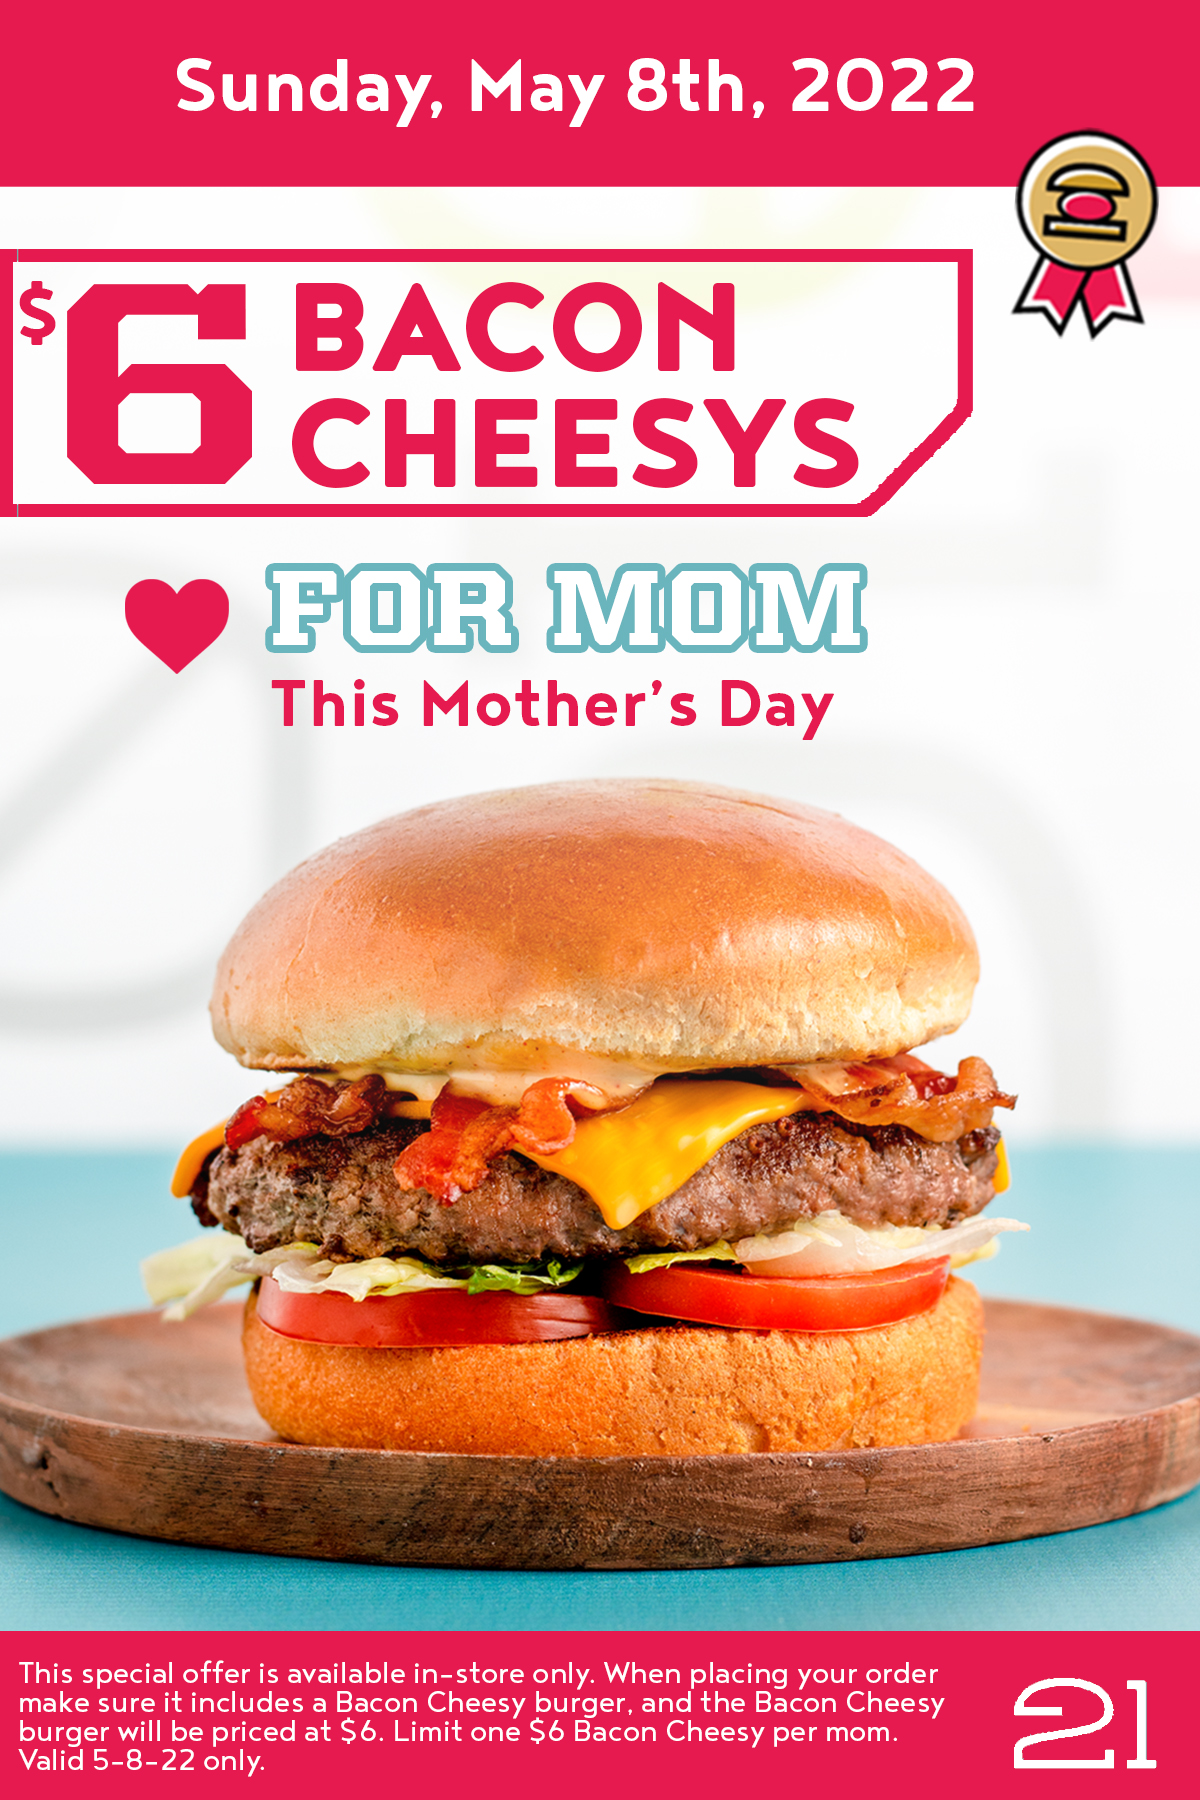 $6  Bacon Cheesys For Mom on Sunday May 8th